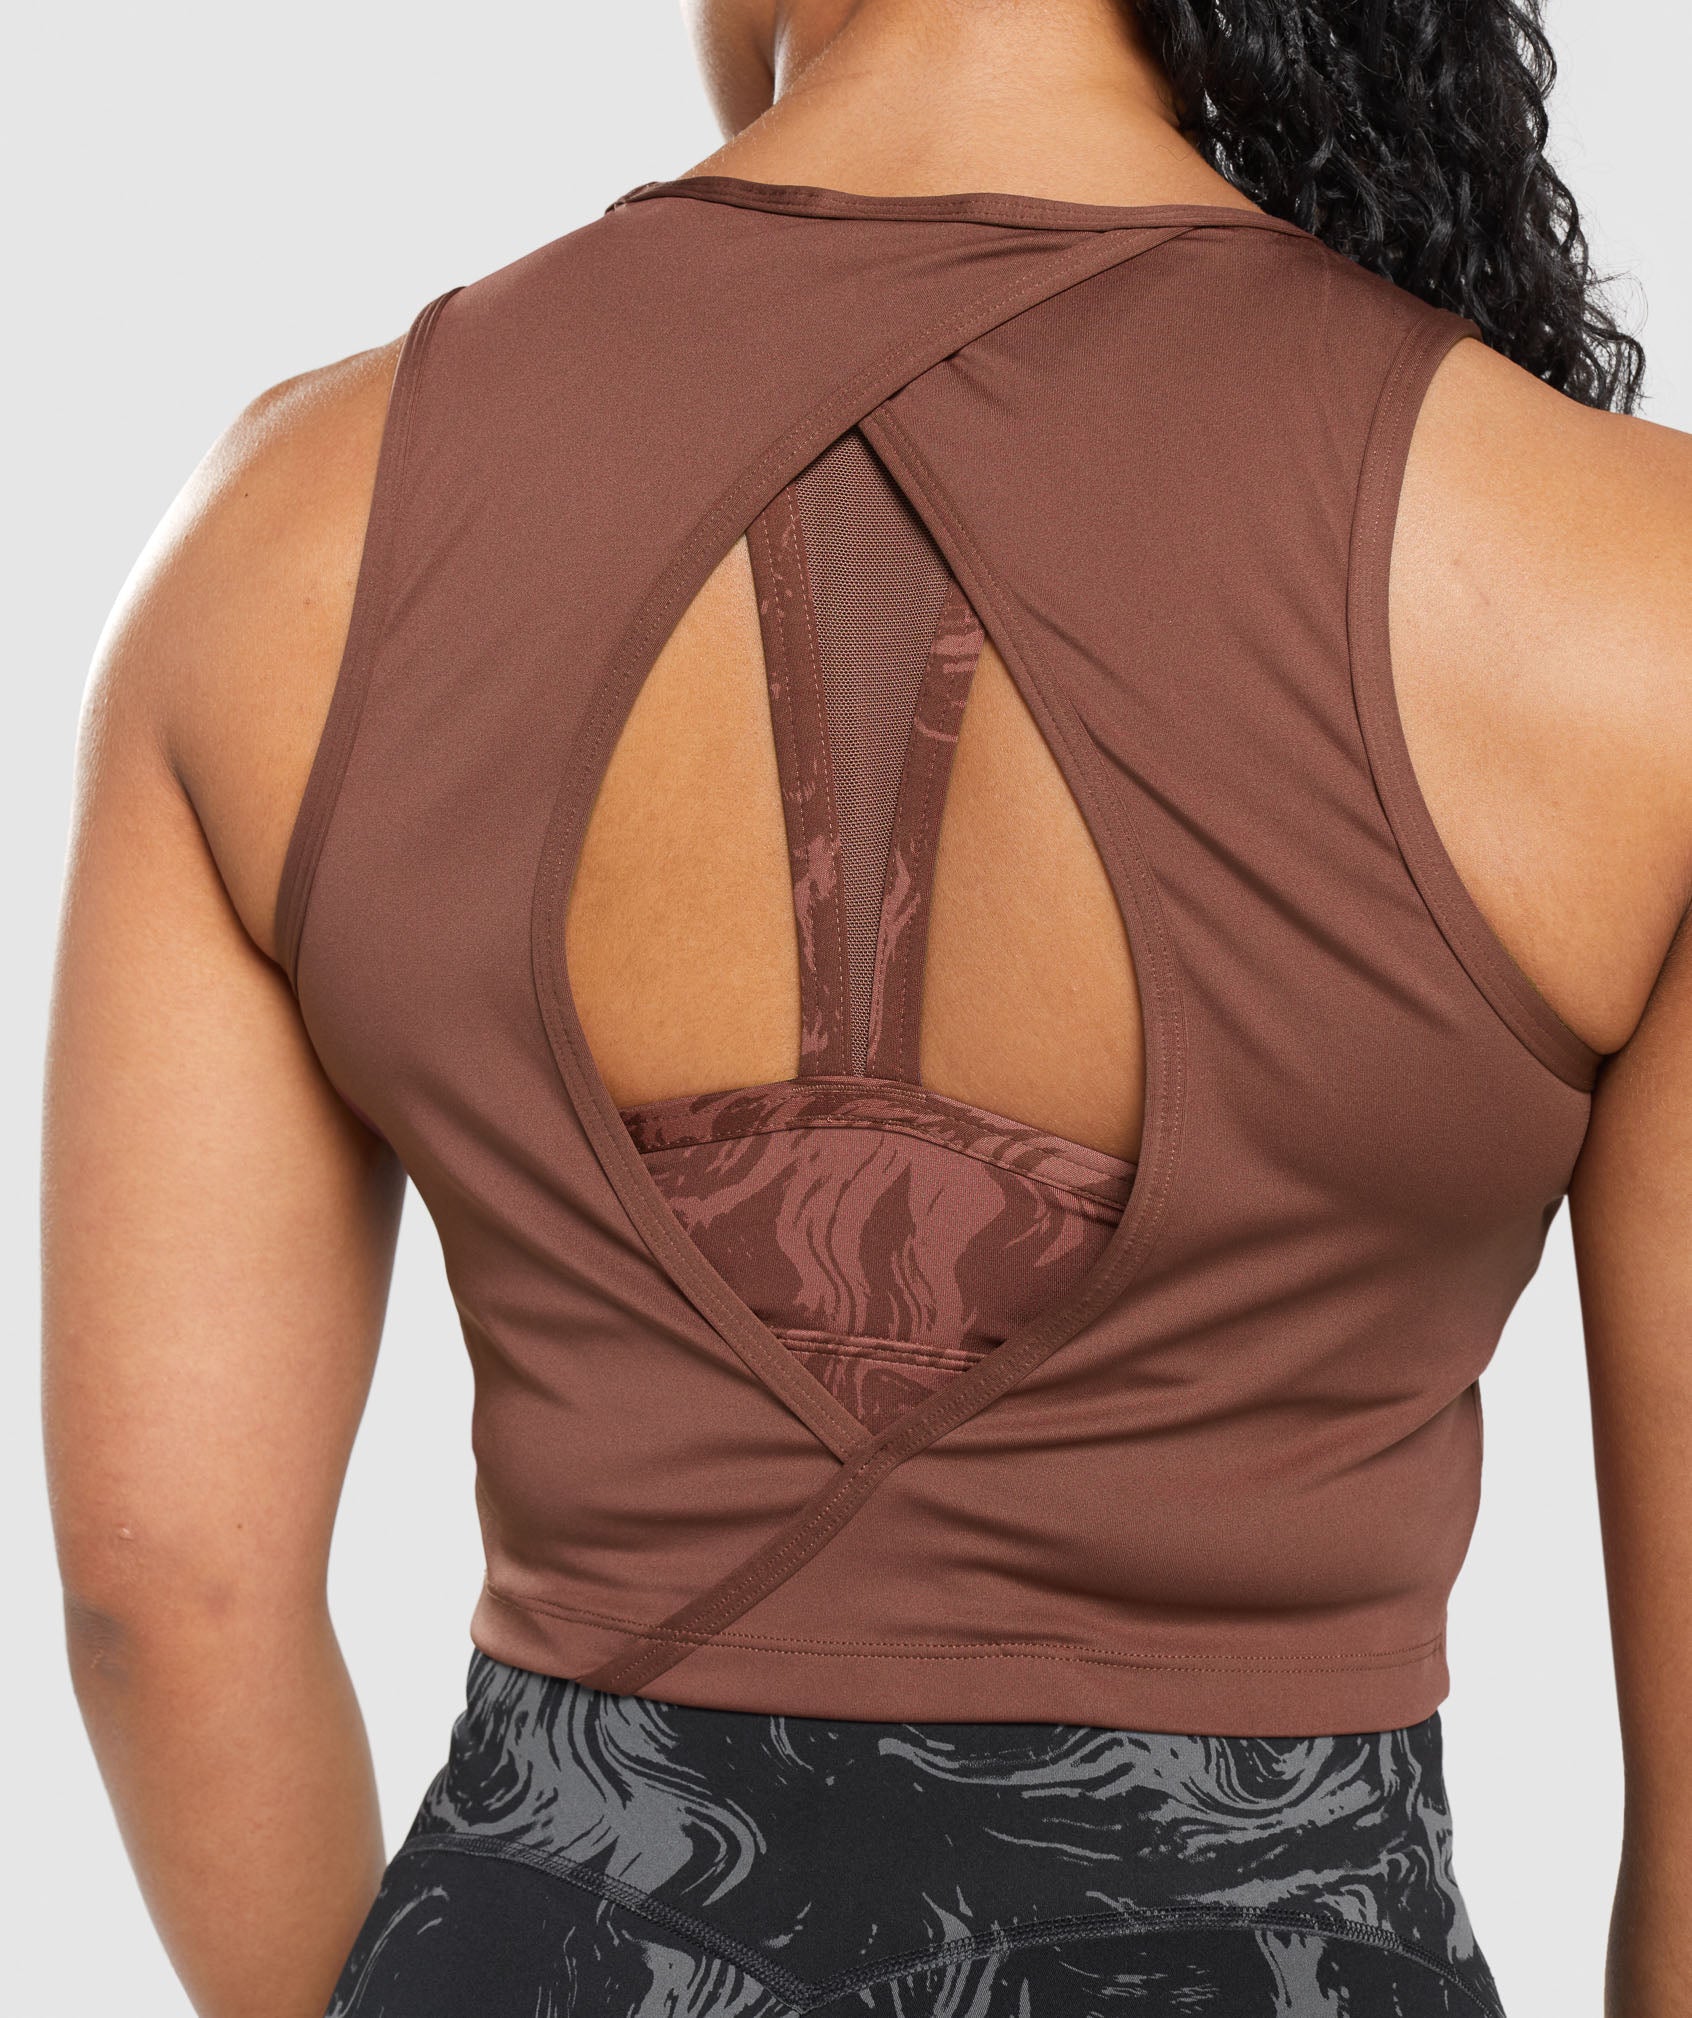 GS Power Open Back Cropped Tank in Cherry Brown - view 6